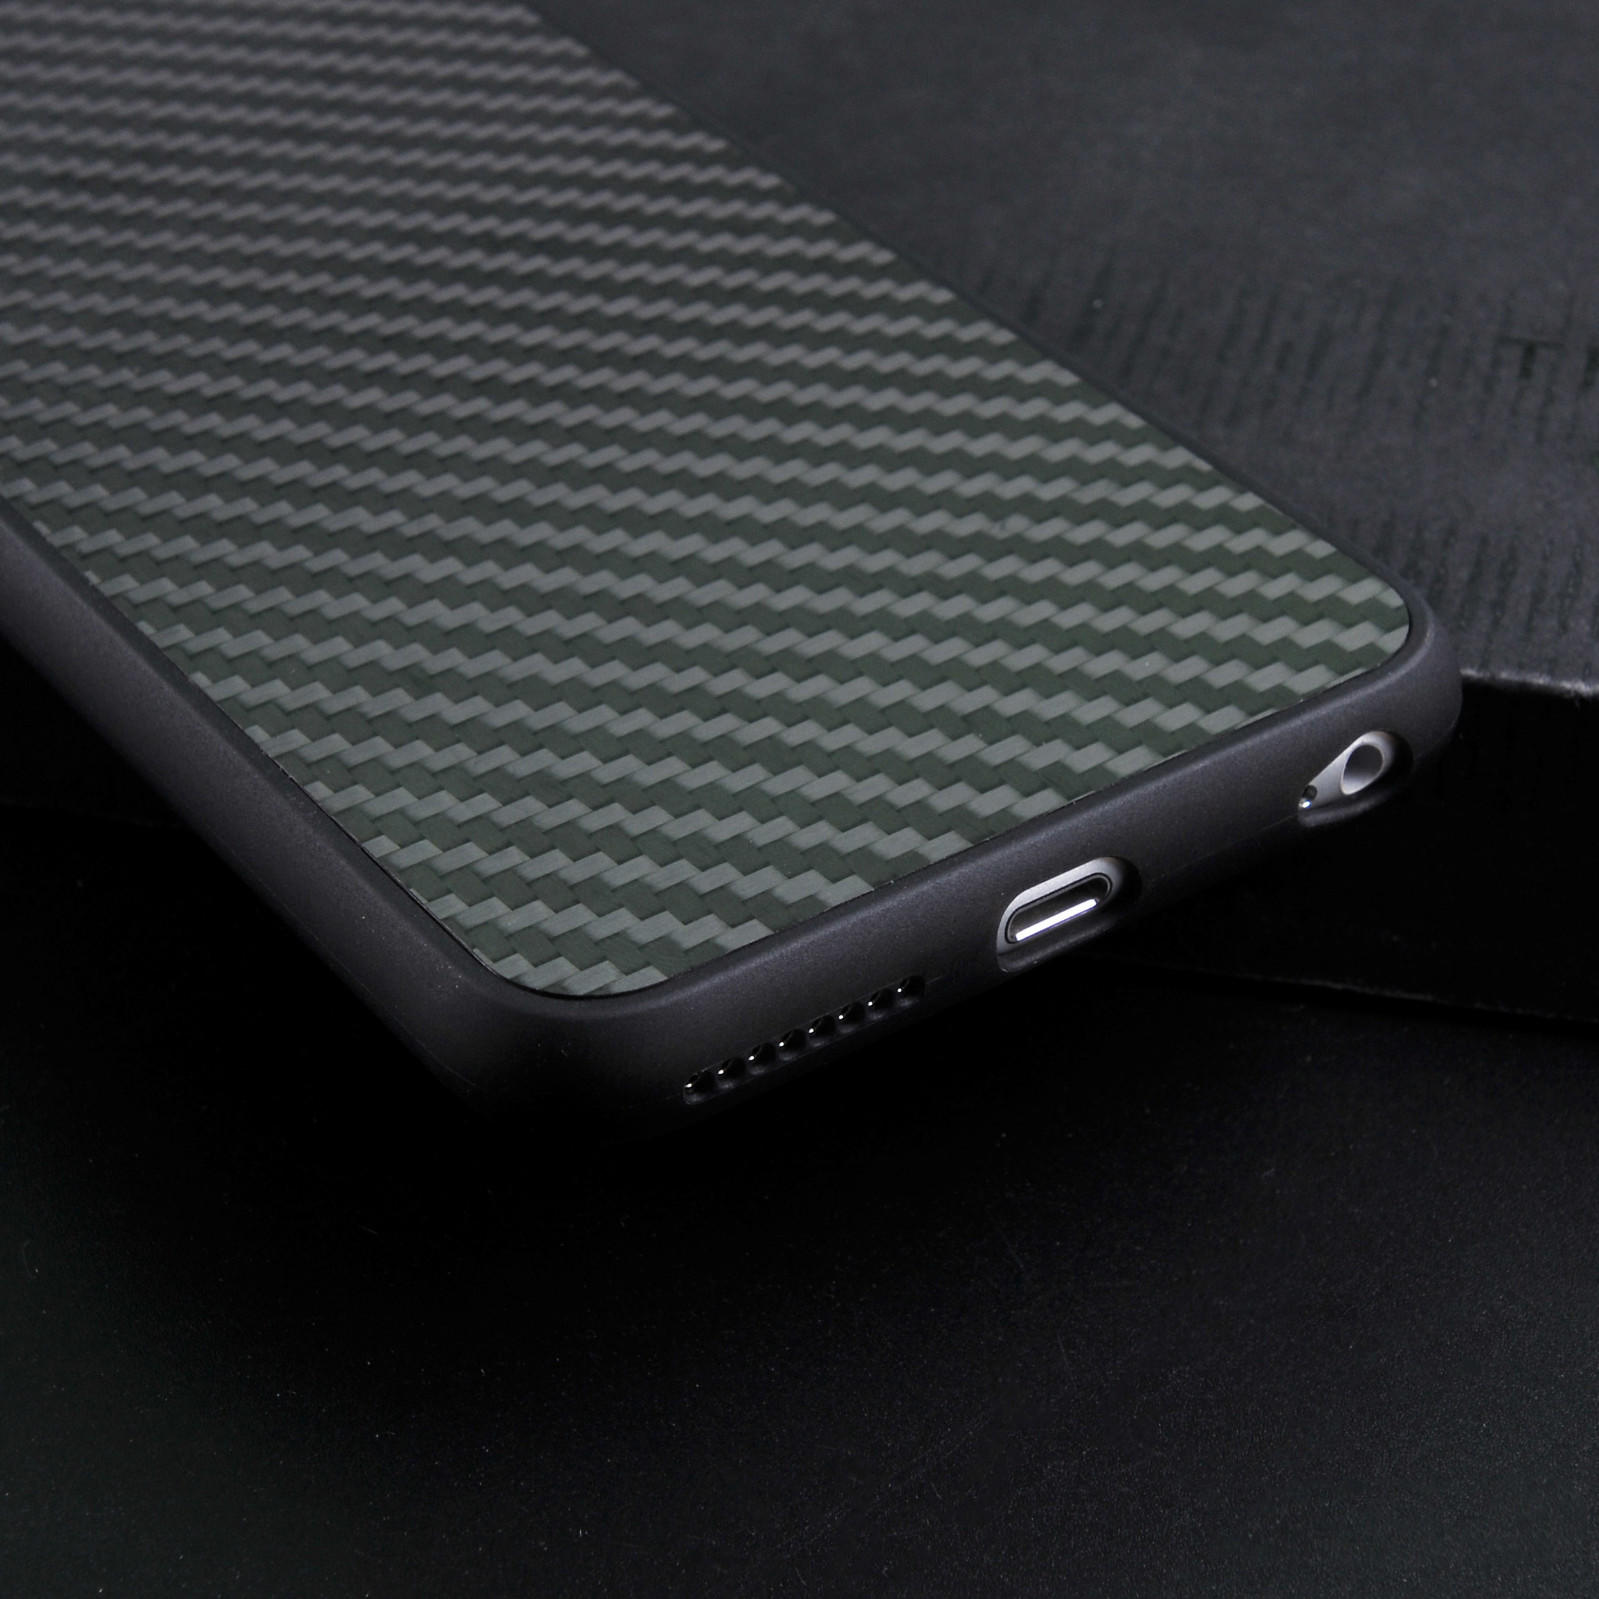 Luxury Black Real Carbon Fiber Case For Iphone CB0001